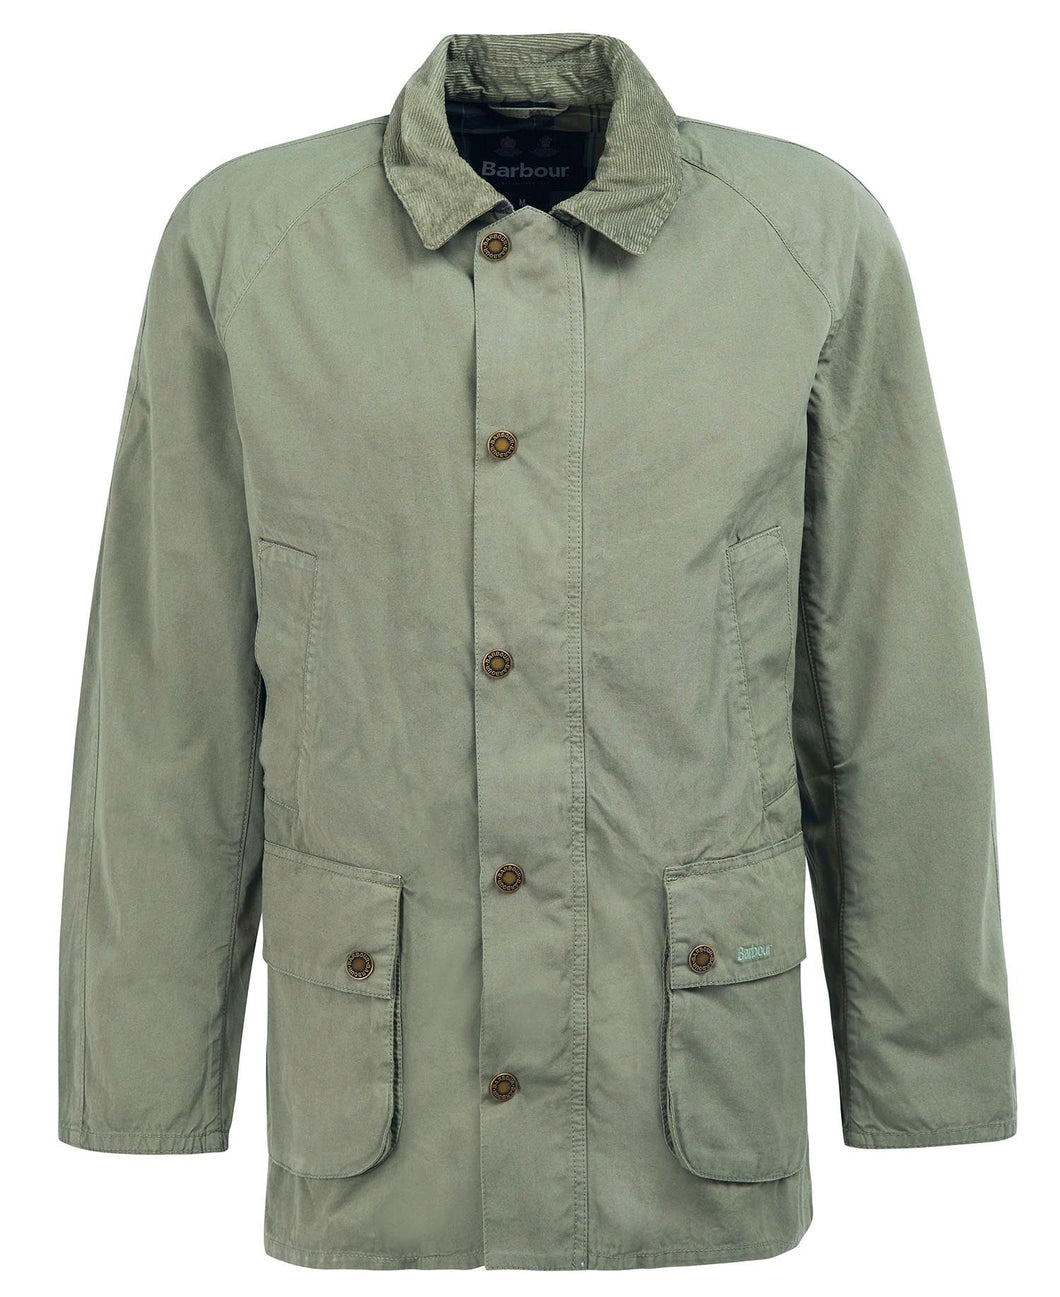 SALE Barbour Ashby Casual Jacket